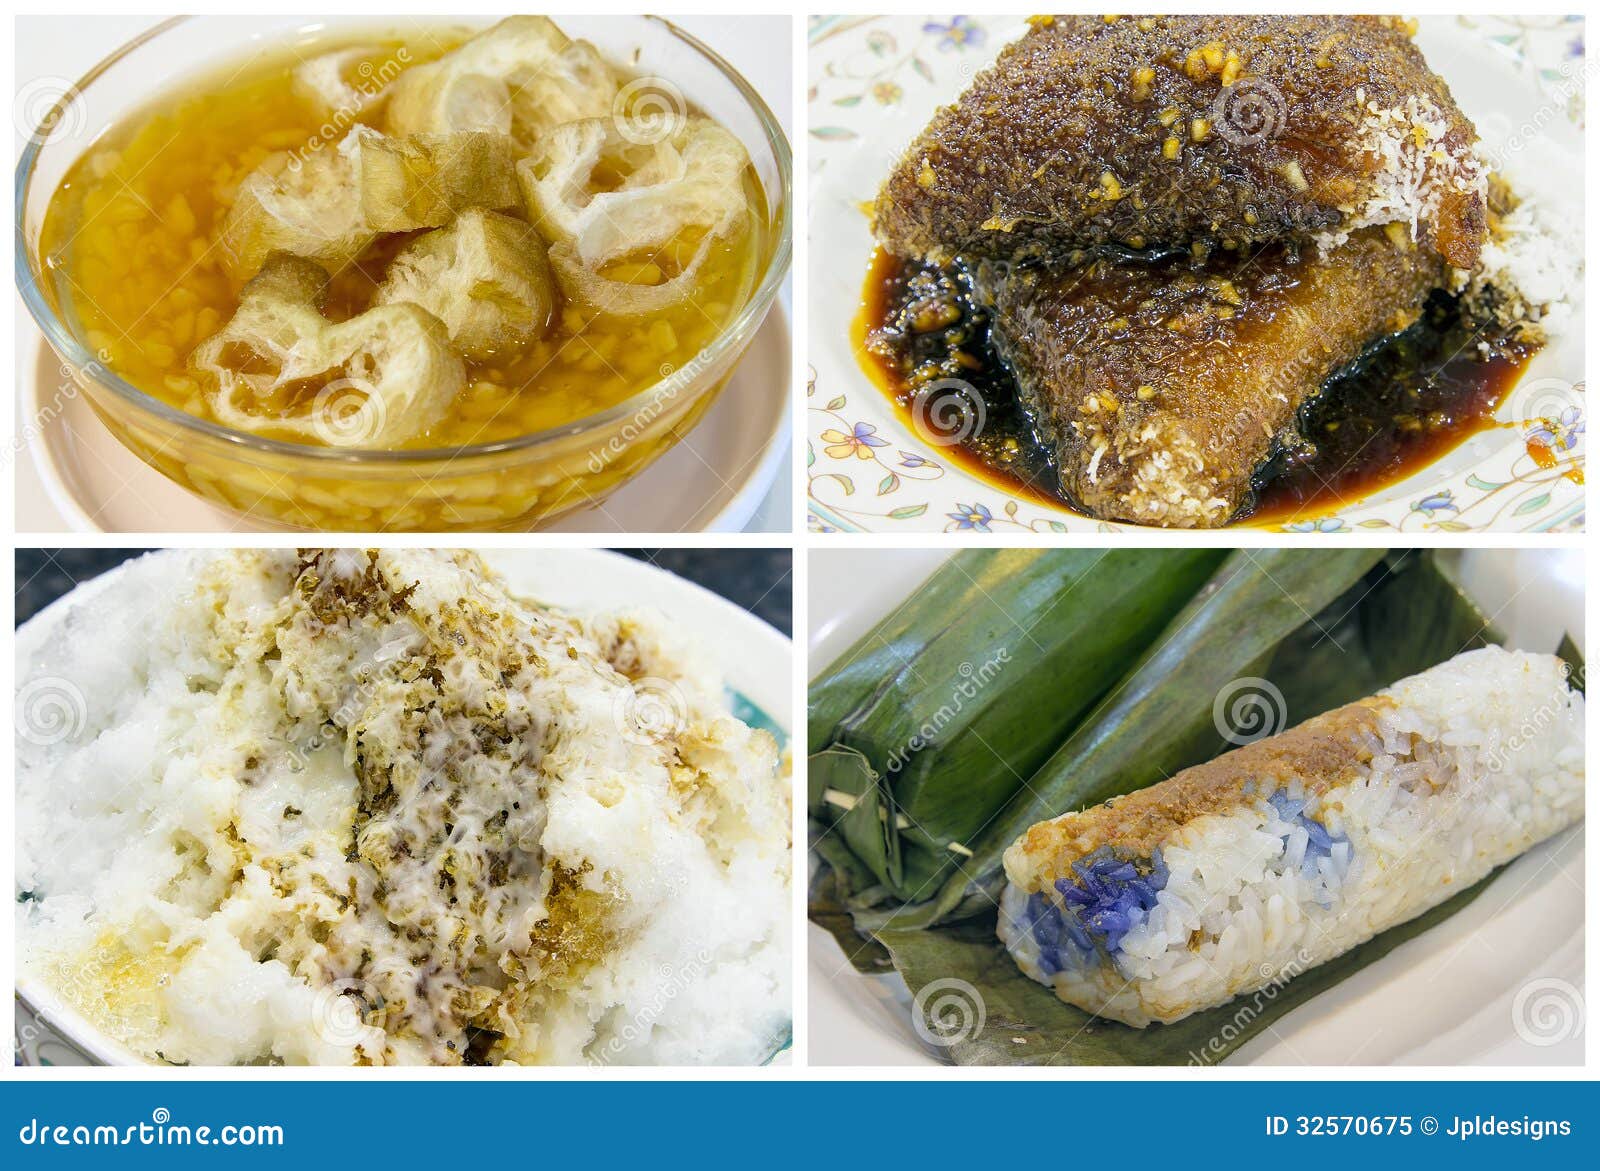 Southeast Asian Singapore Dessert And Snacks Collage 